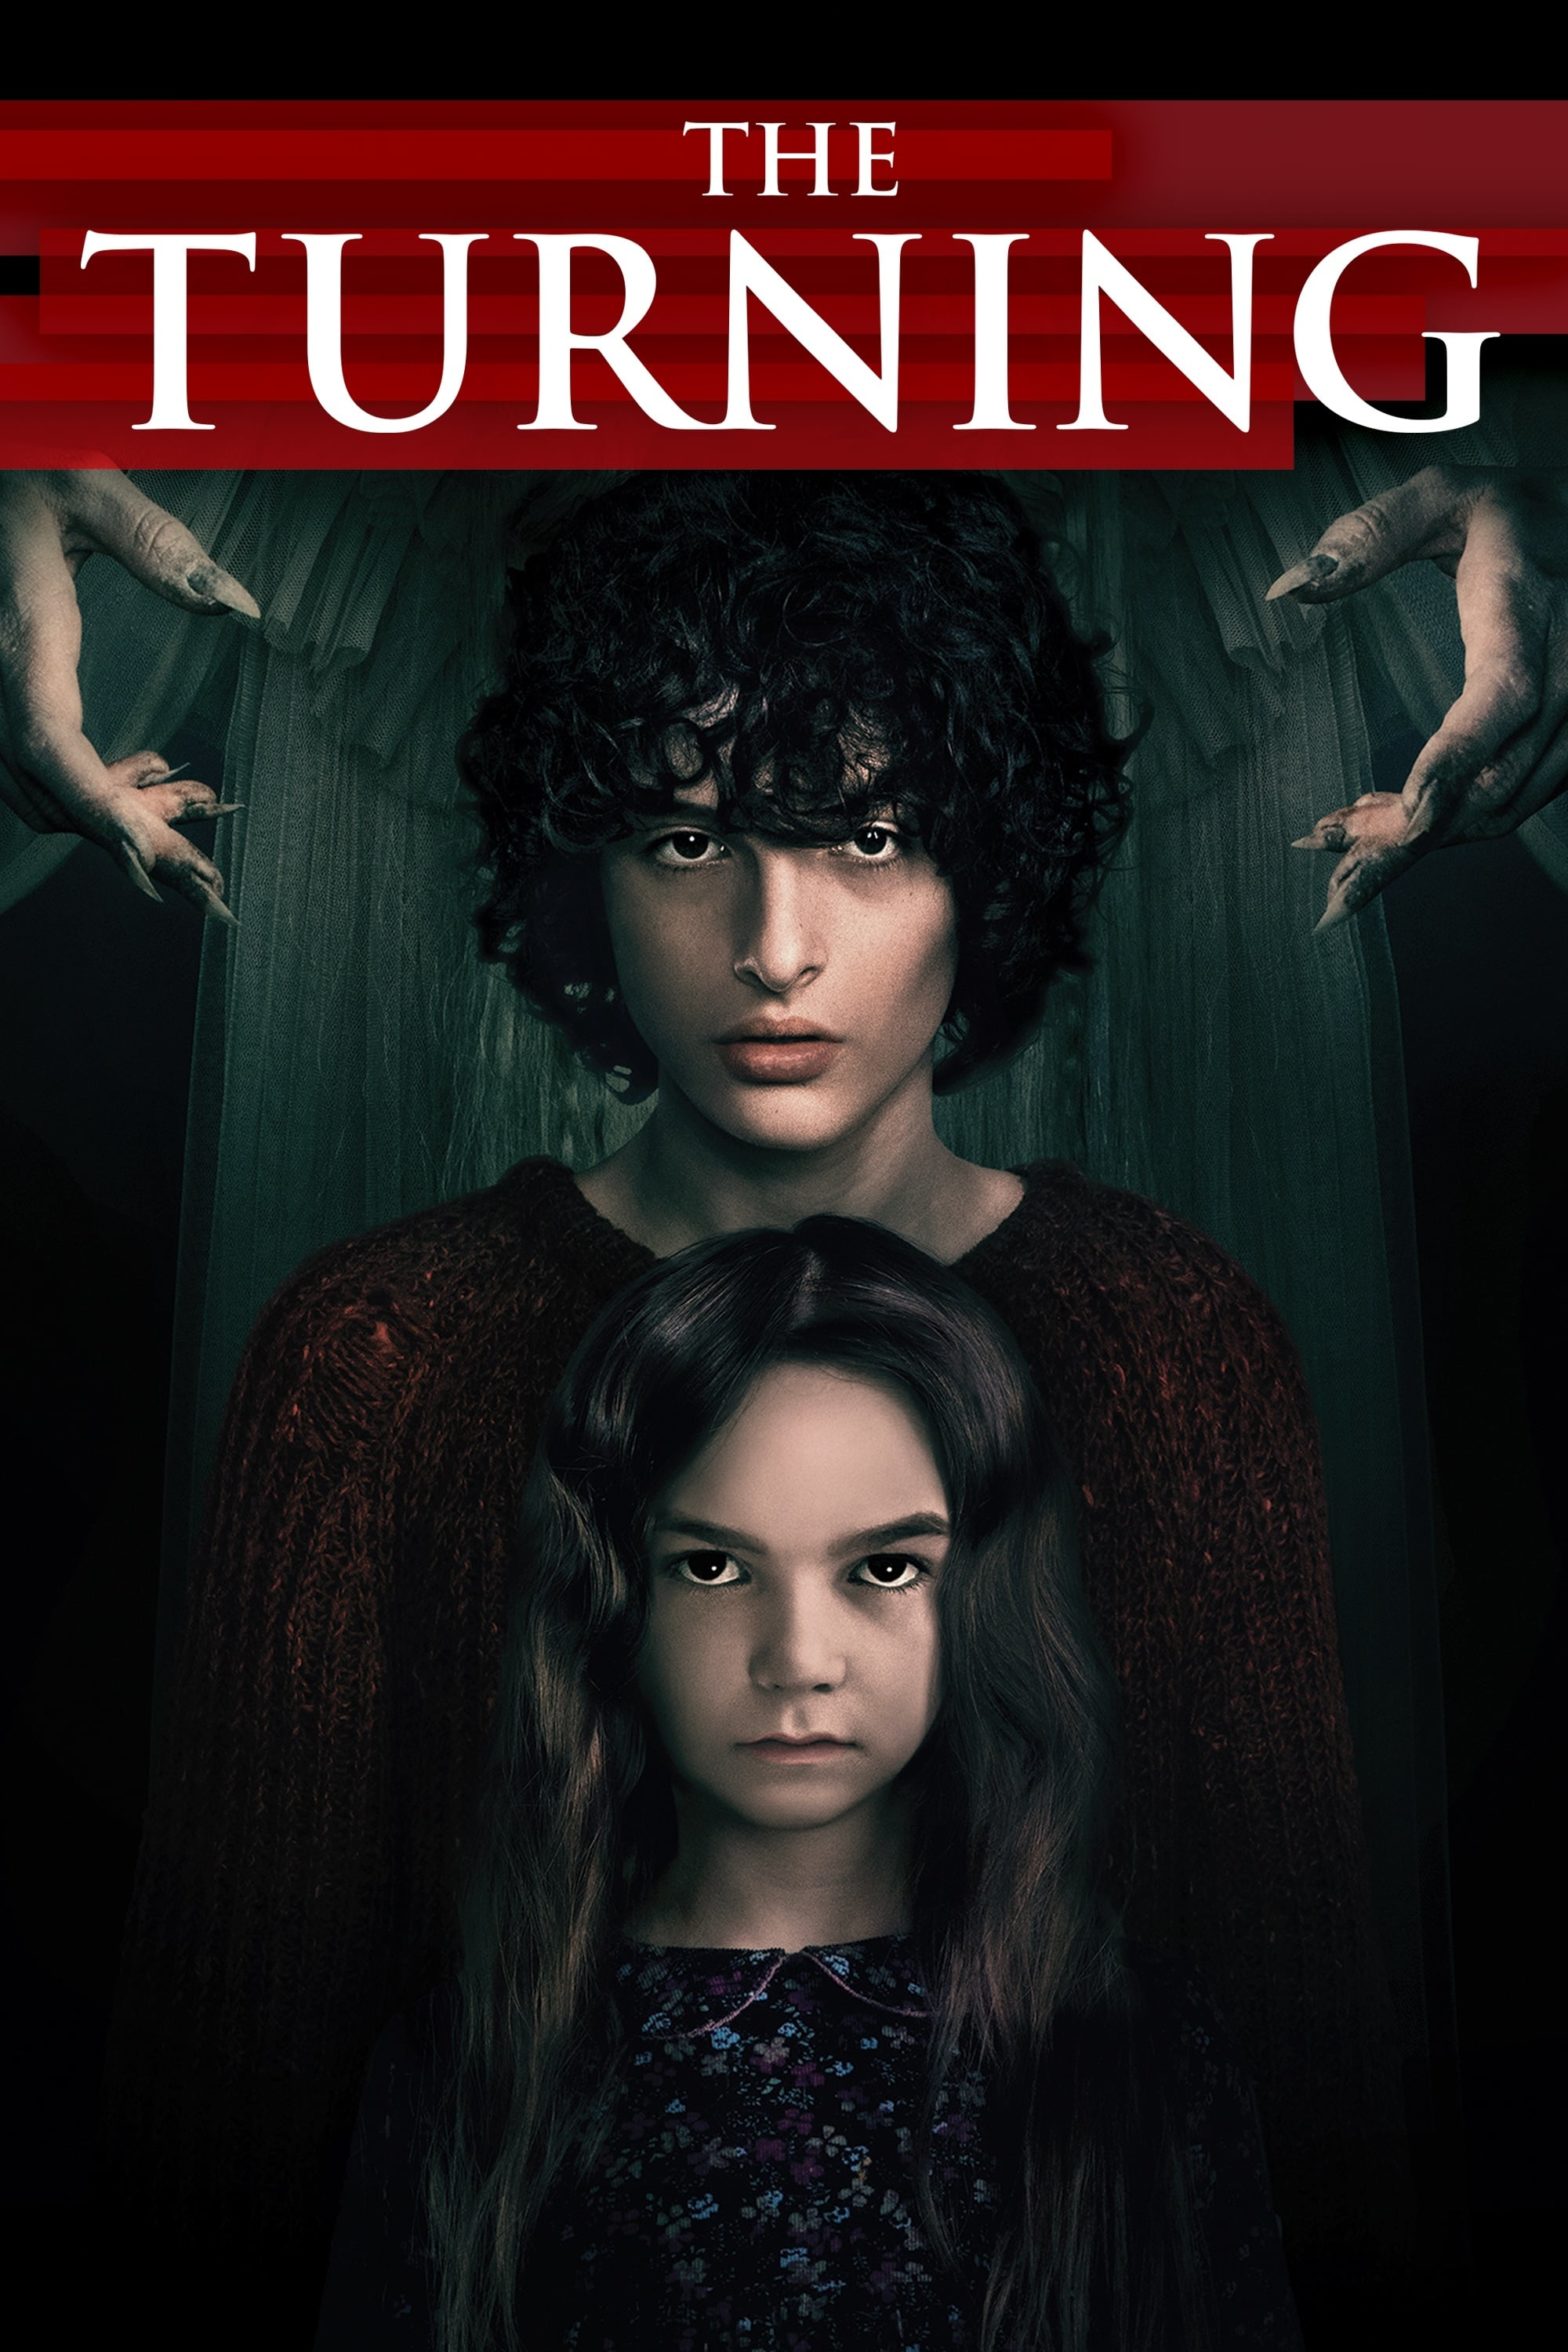 Poster for the movie "The Turning"